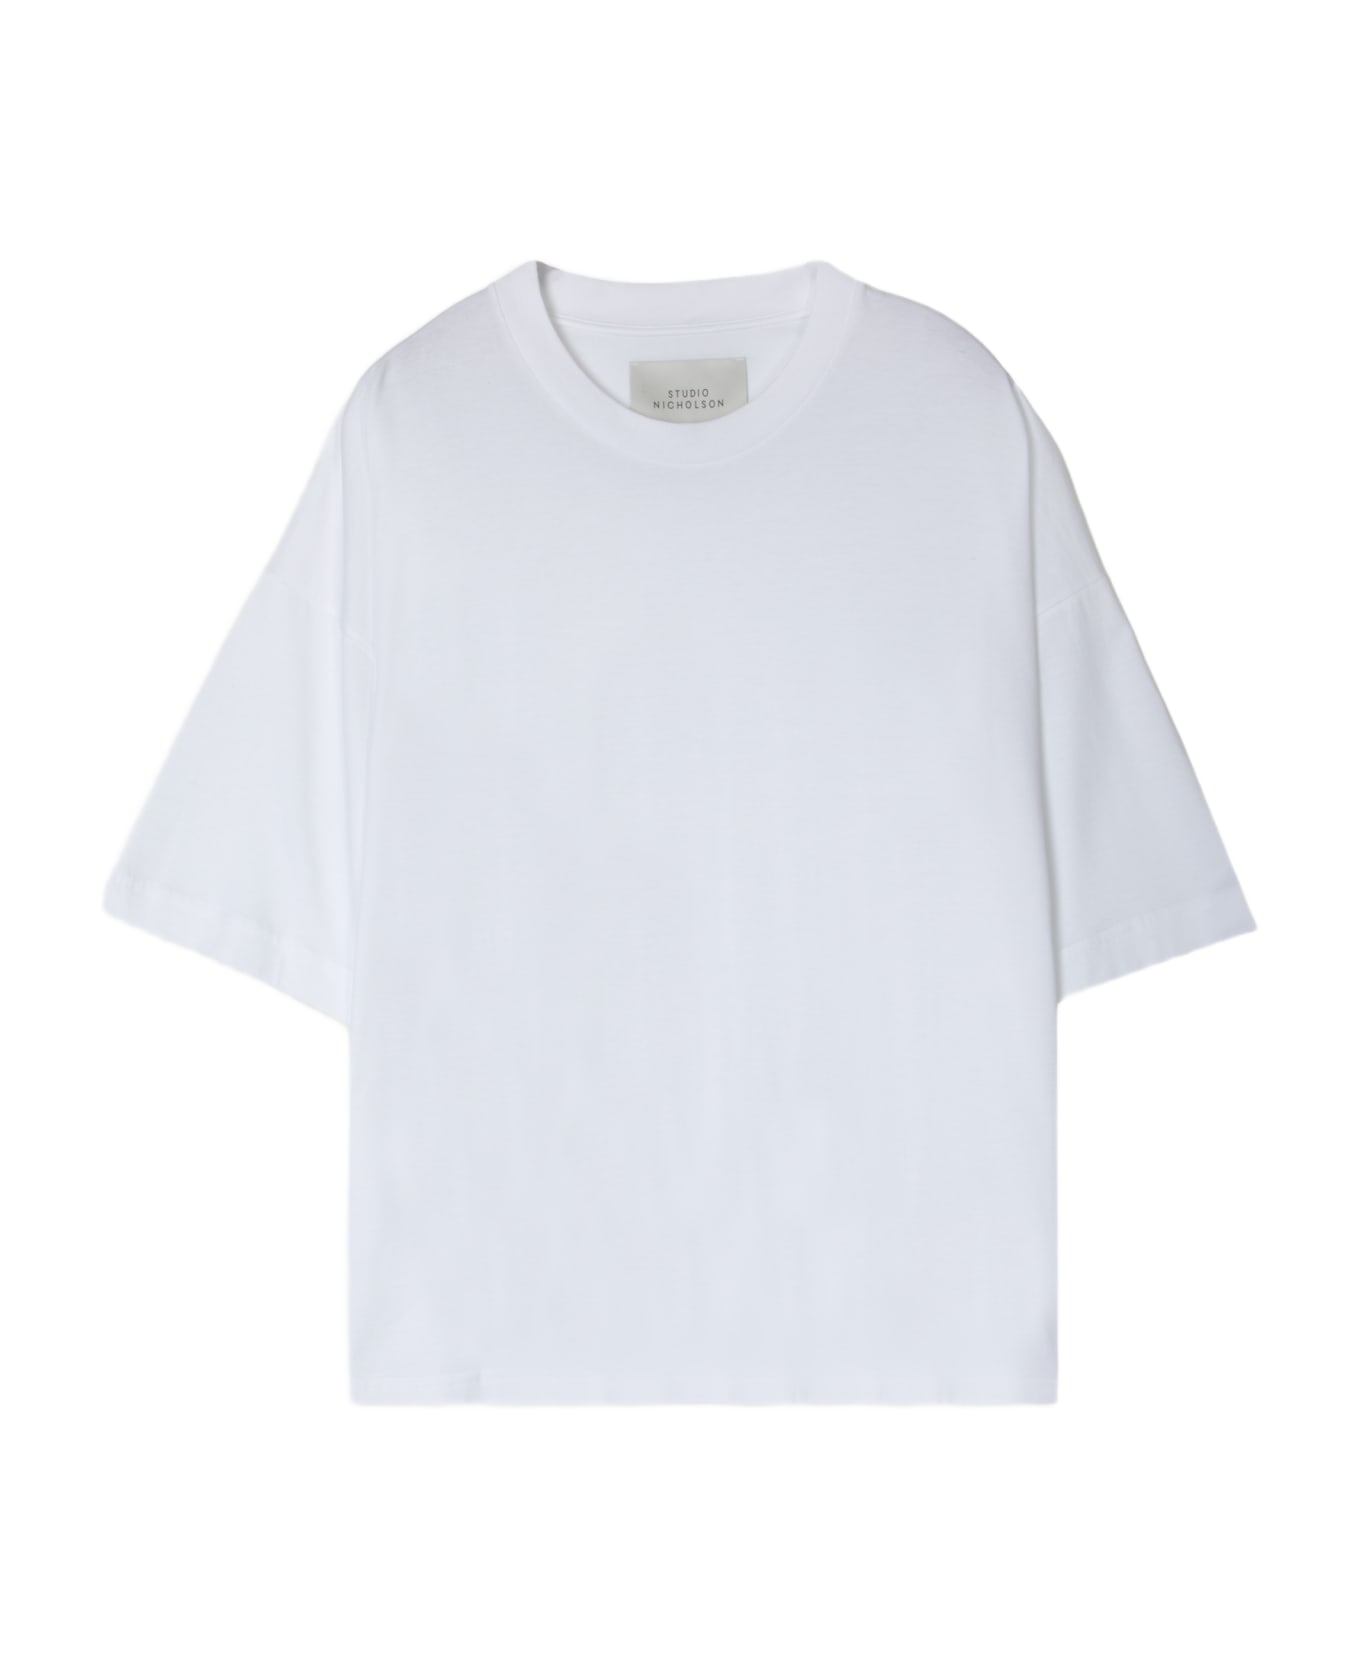 Studio Nicholson Jersey - Branded Easy Fit Ss T-shirt White relaxed fit t-shirt - Piu - Bianco